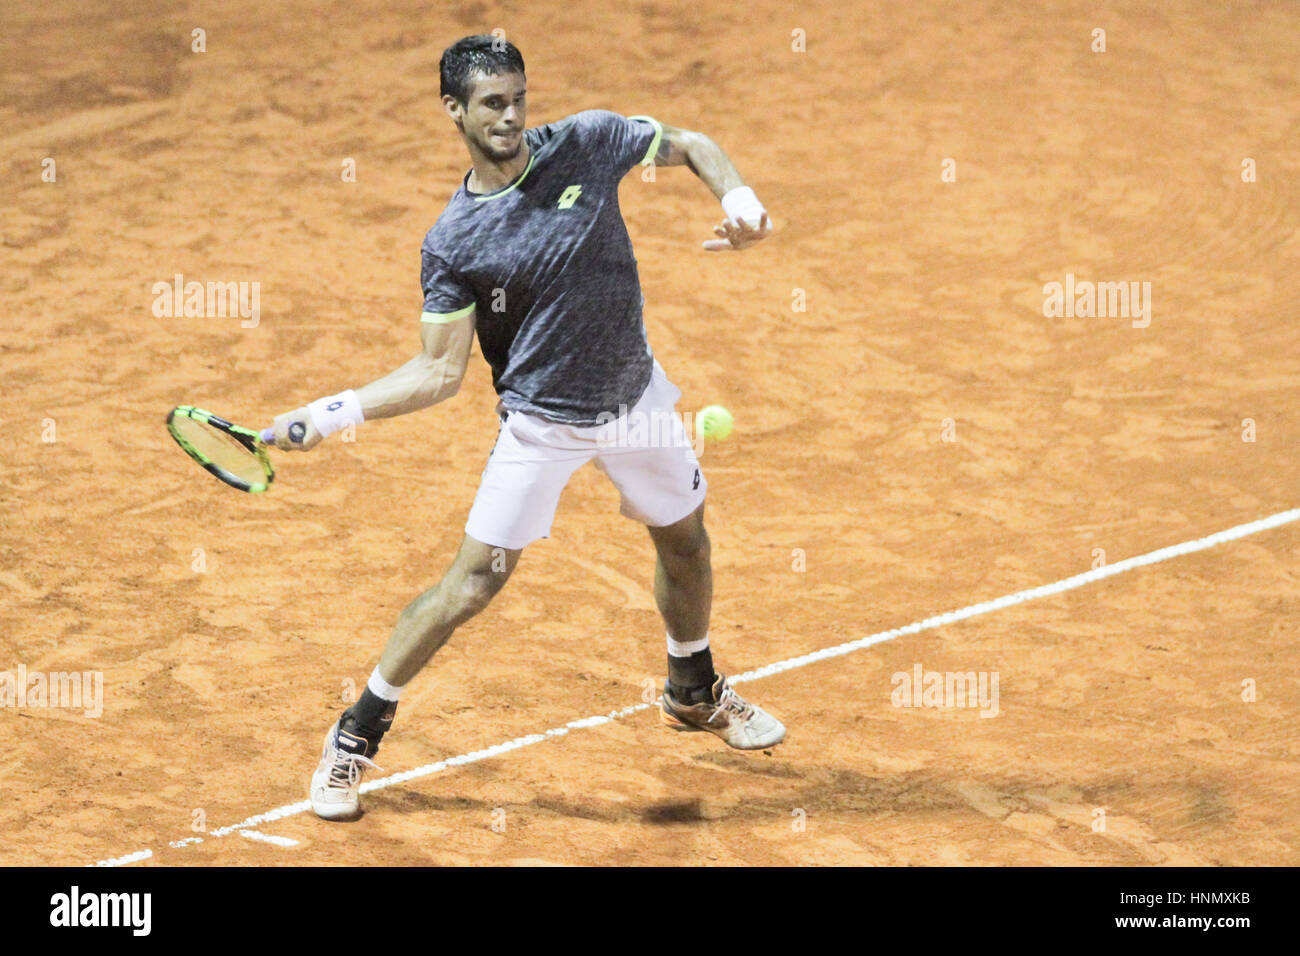 Buenos Aires, Argentina. 14th Feb, 2017. Brazilian player Rogerio Dutra Silva during the first round of main draw of Buenos Aires ATP 250.  Credit: Néstor J. Beremblum/Alamy Live News Stock Photo